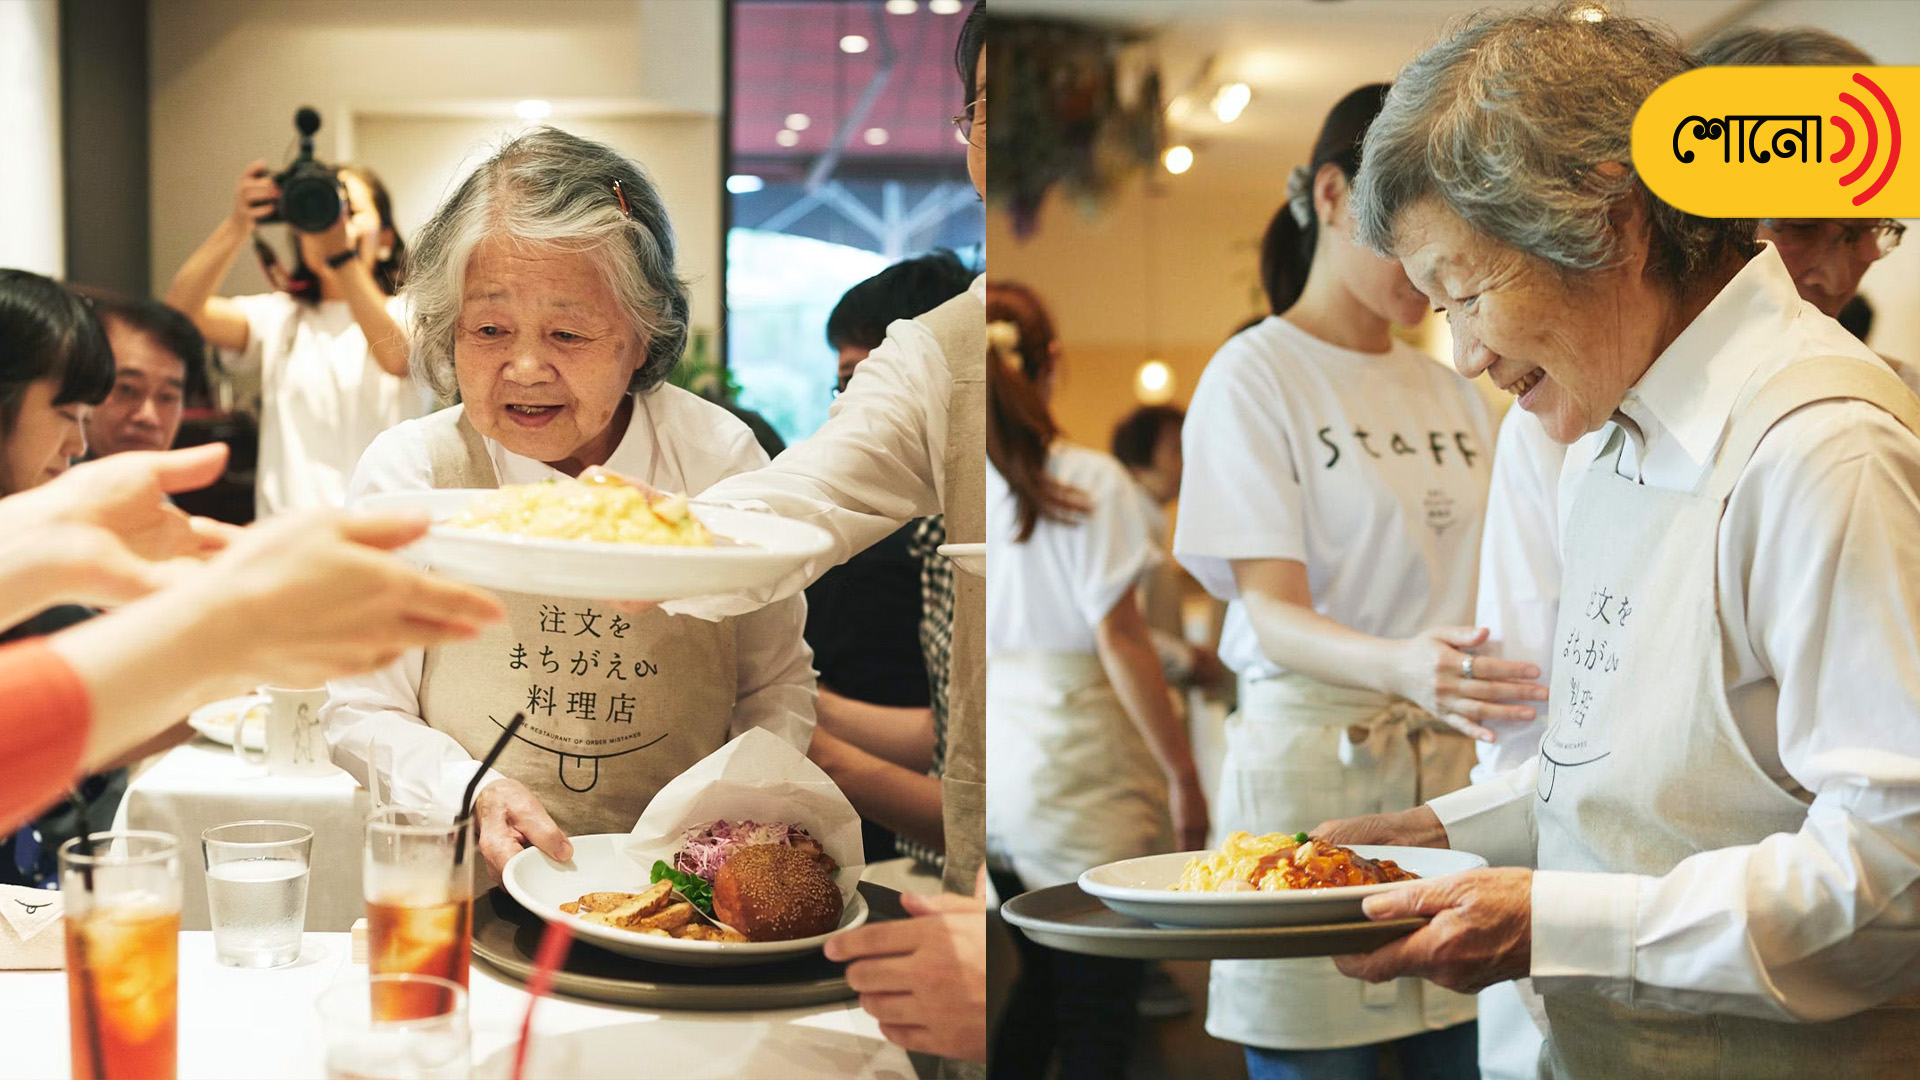 In this unique cafe, people with dementia work as waiters